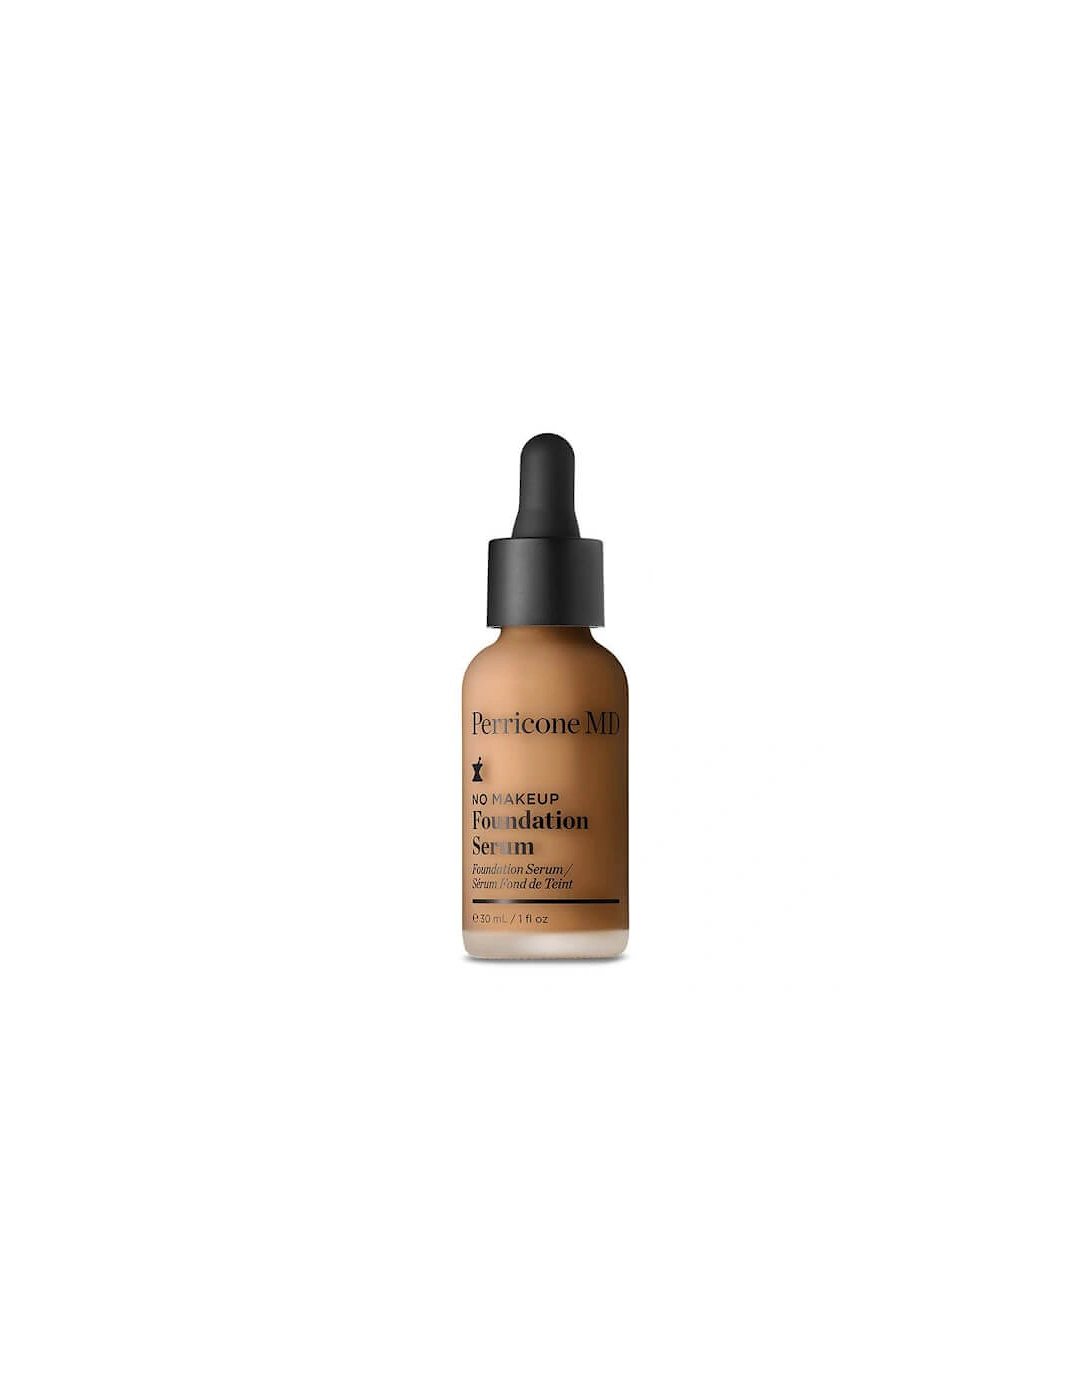 No Makeup Foundation Serum Broad Spectrum SPF20 - Tan - Perricone MD, 2 of 1